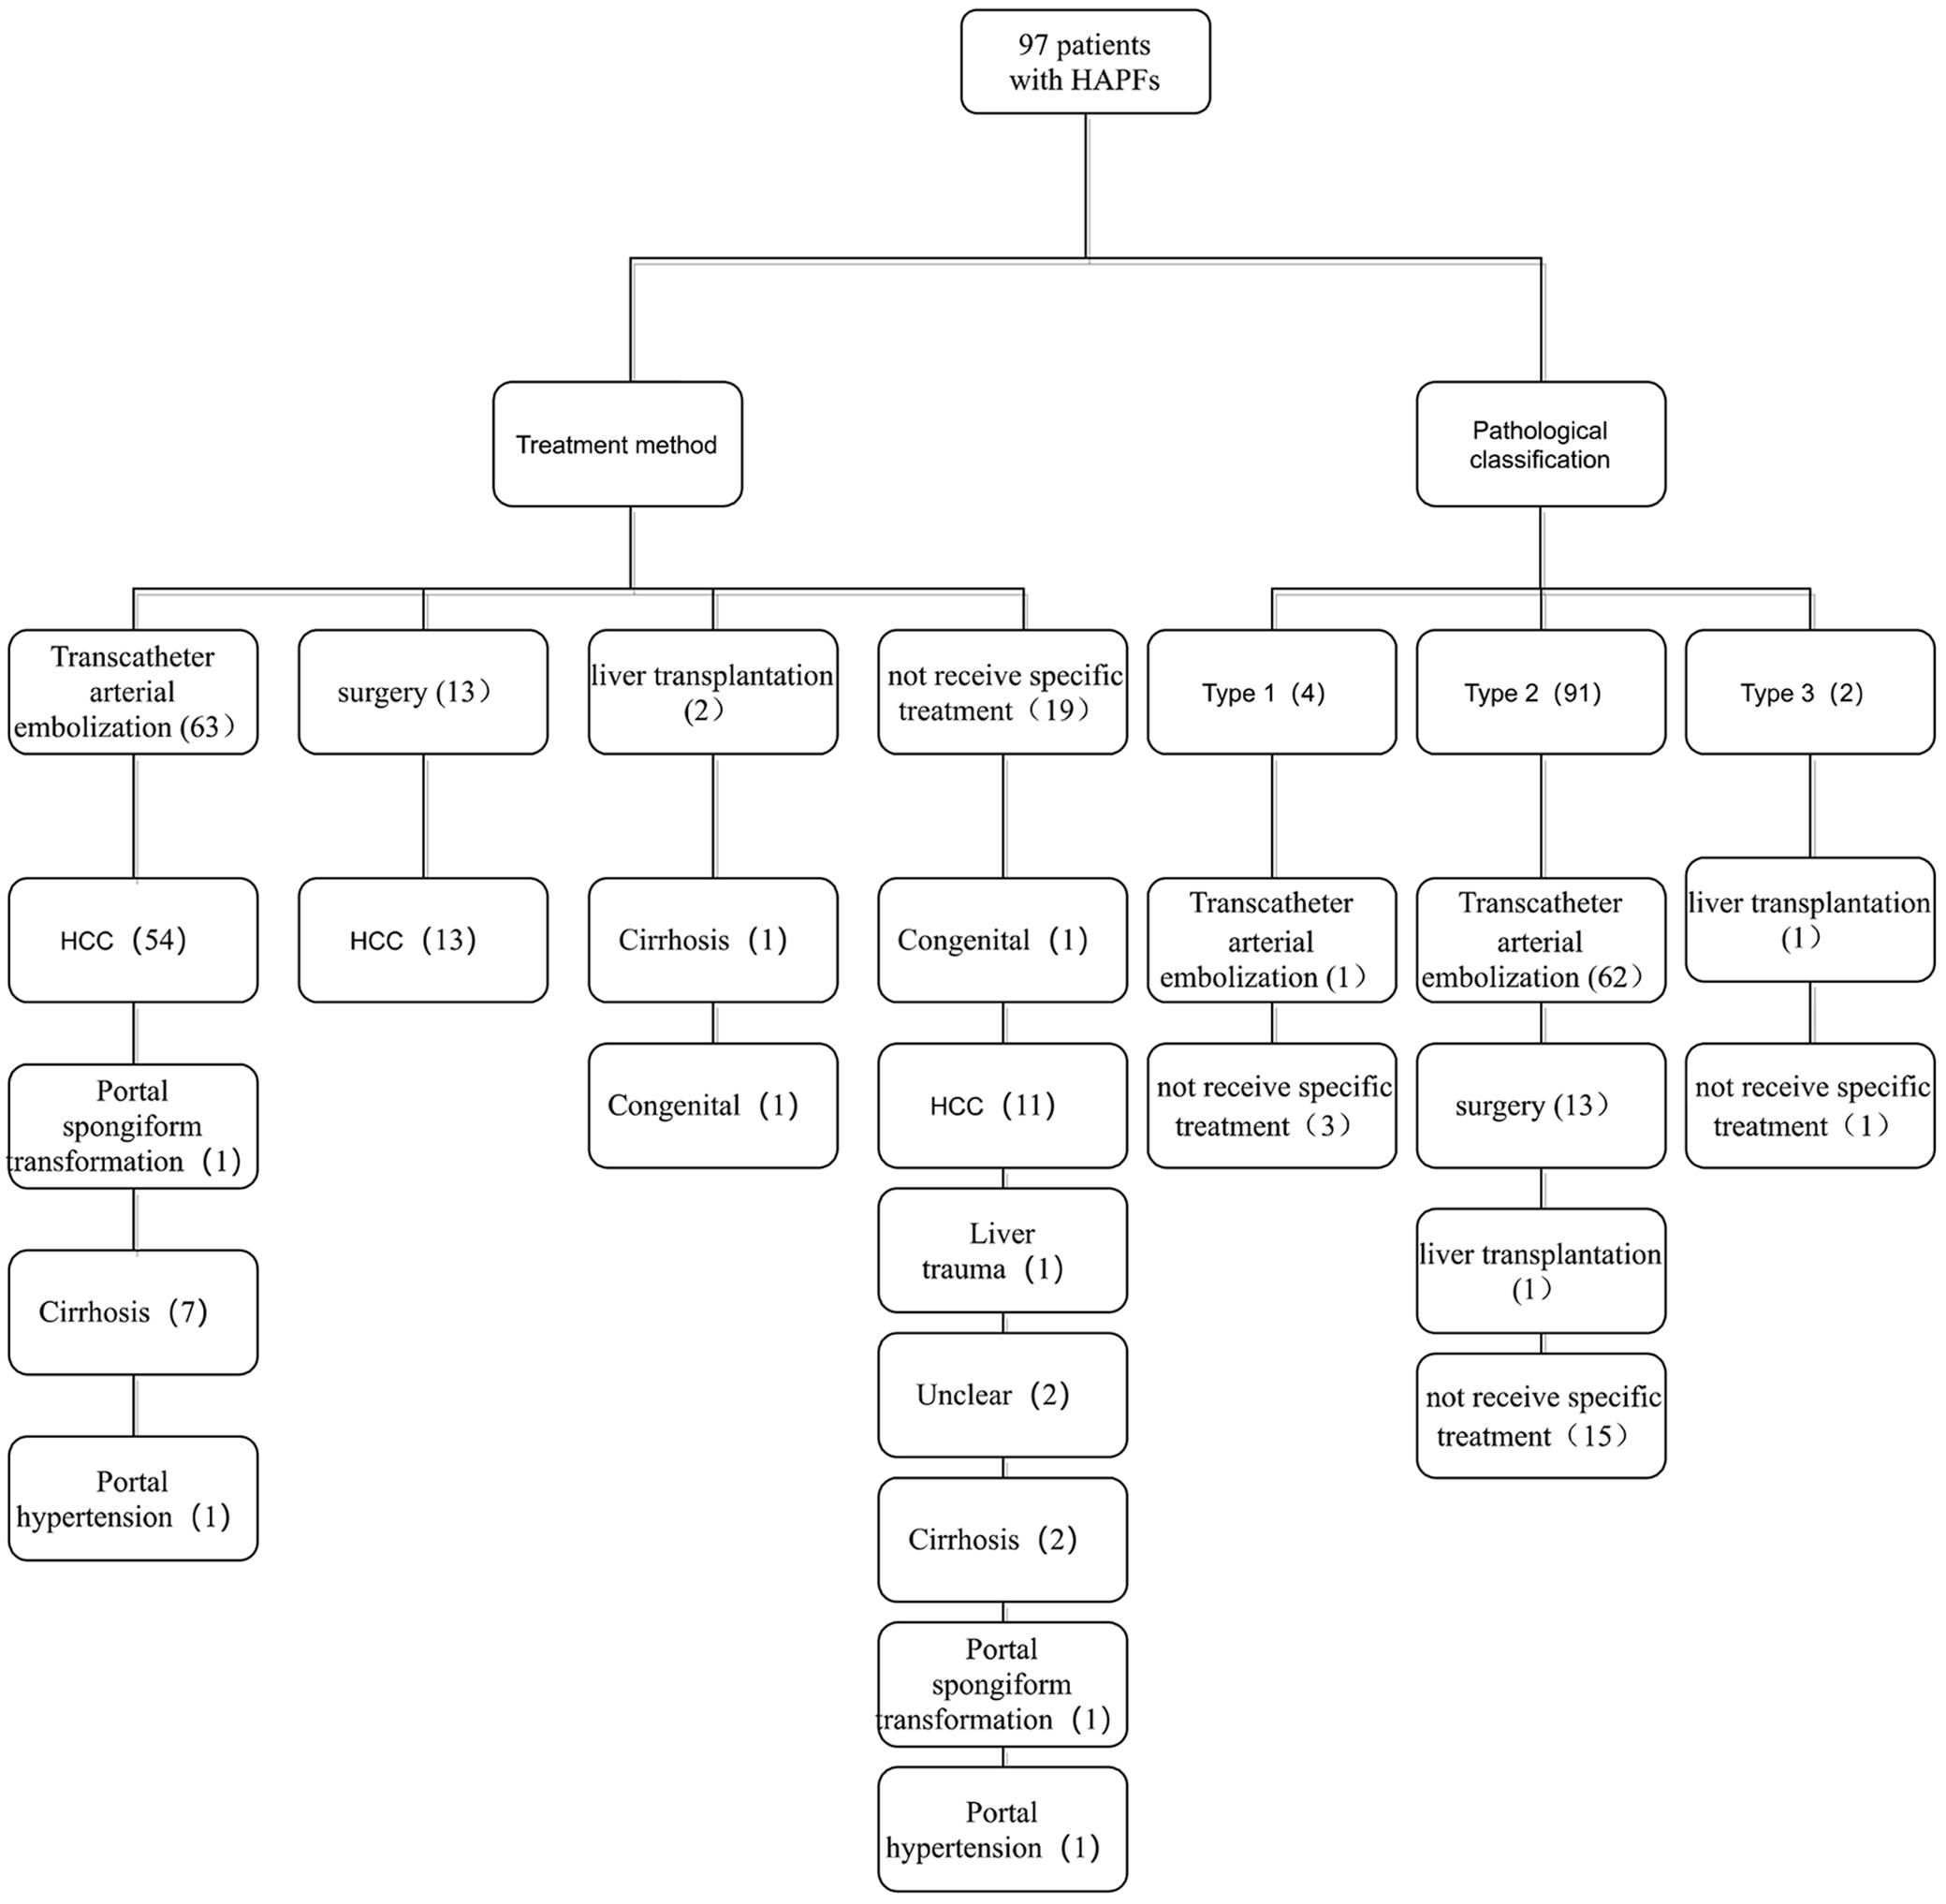 Flow chart for management of the 97 cases of HAPF in the present study.